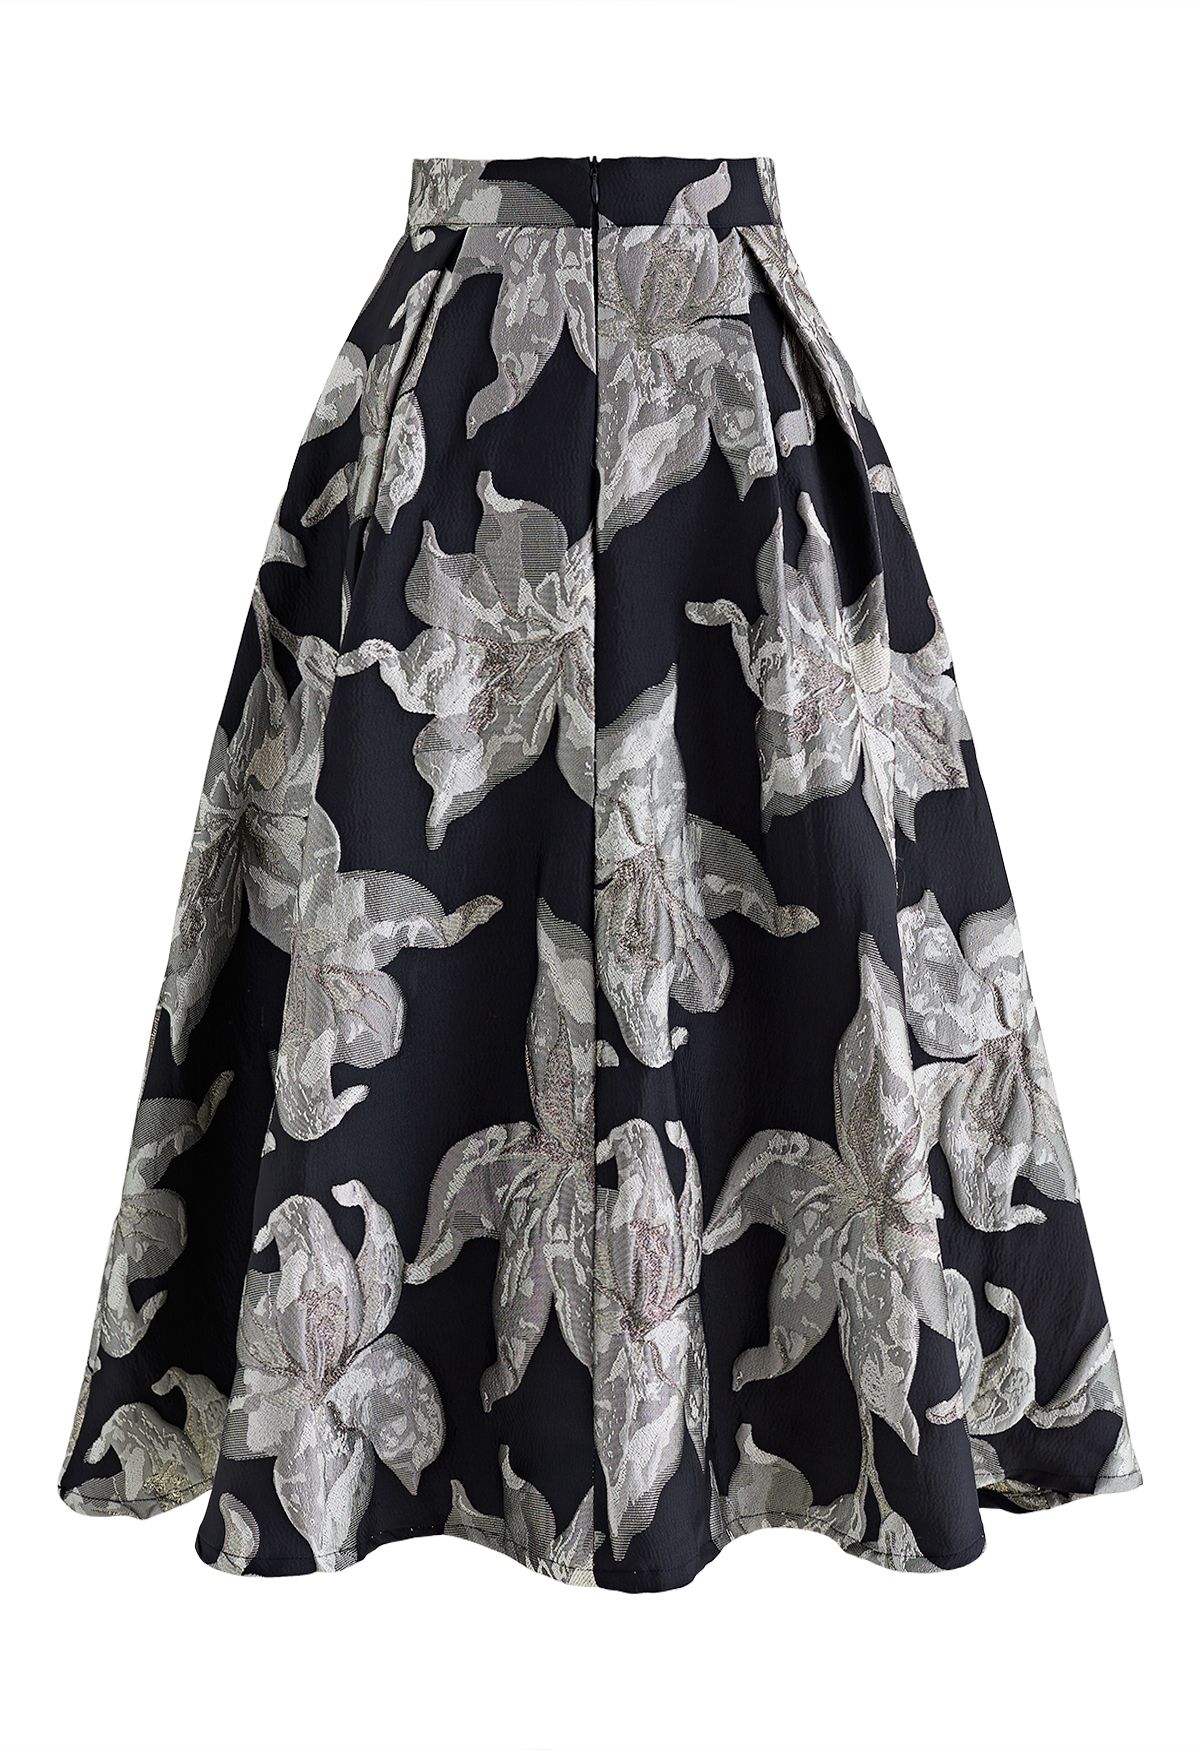 Lily Blossom Metallic Jacquard Midi Skirt in Silver - Retro, Indie and ...